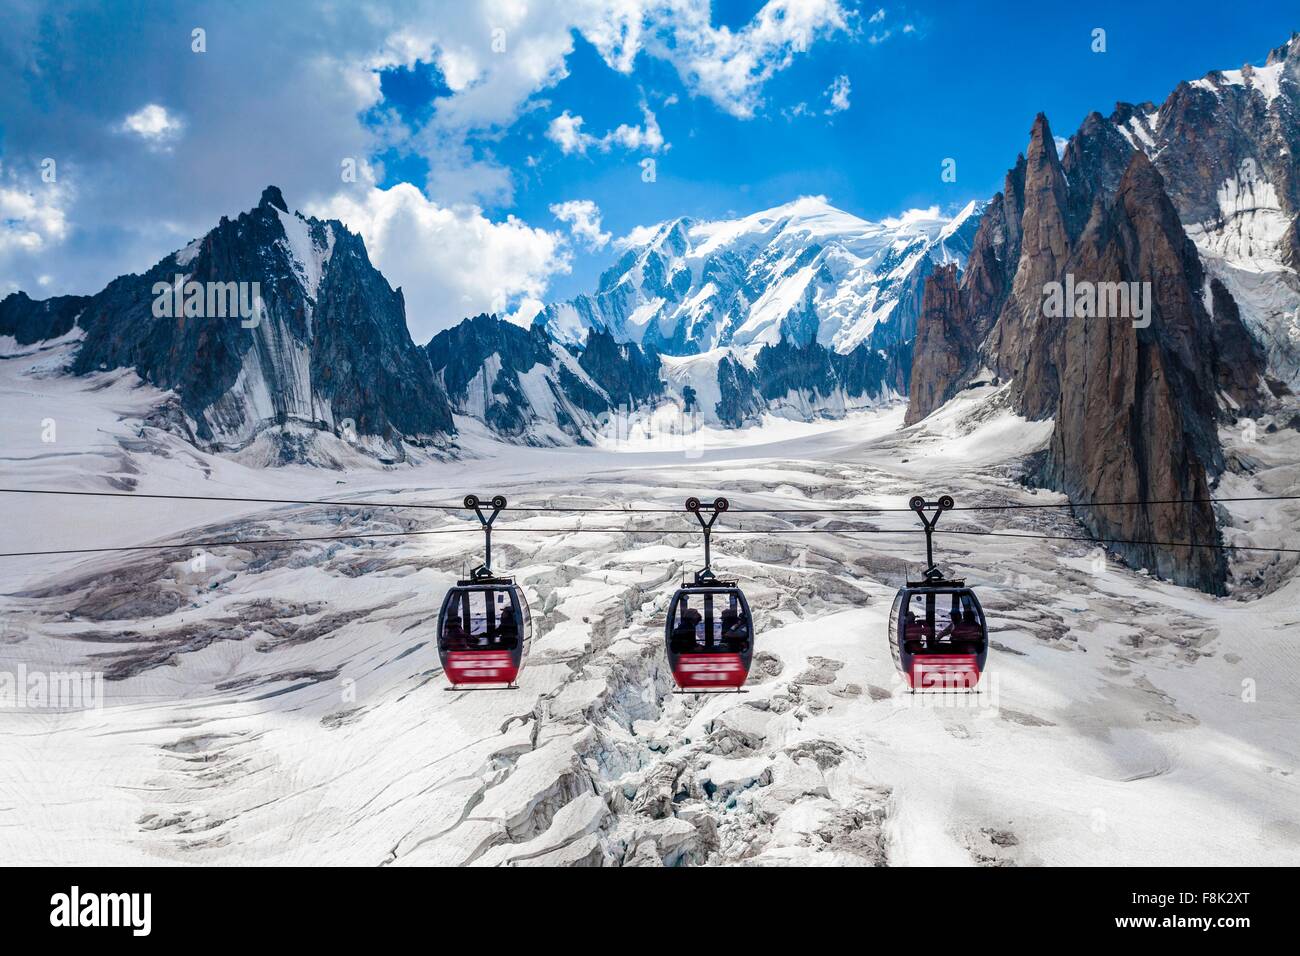 Elevated view of three cable cars over snow covered valley at Mont blanc, France Stock Photo